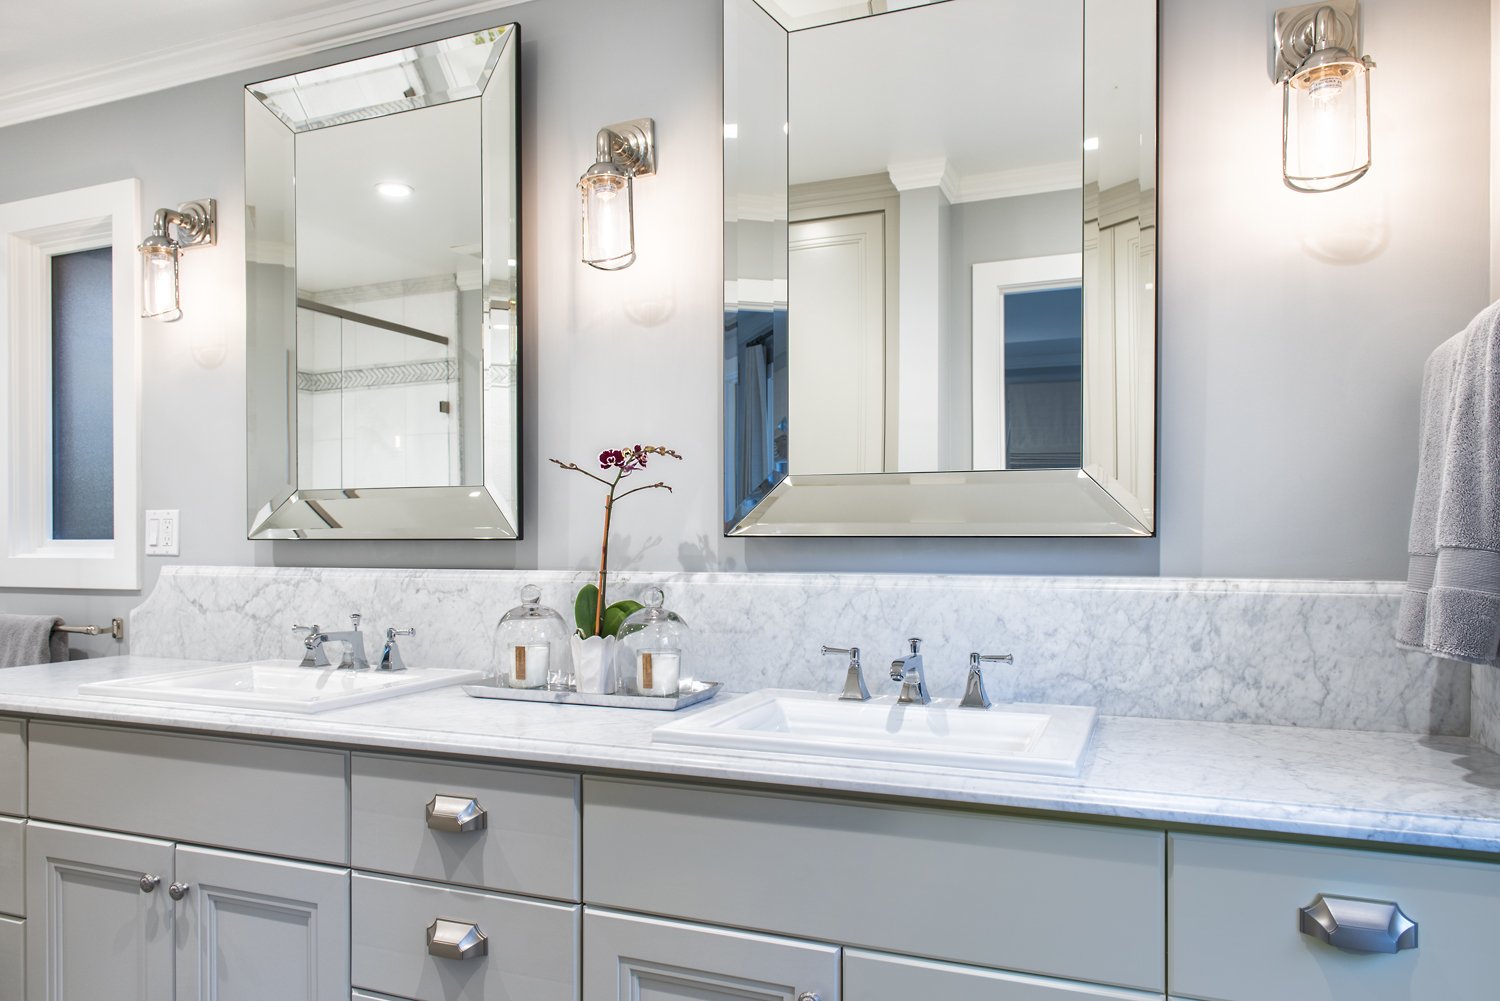  A bathroom with two sinks, large mirrors, and sconce lights.  